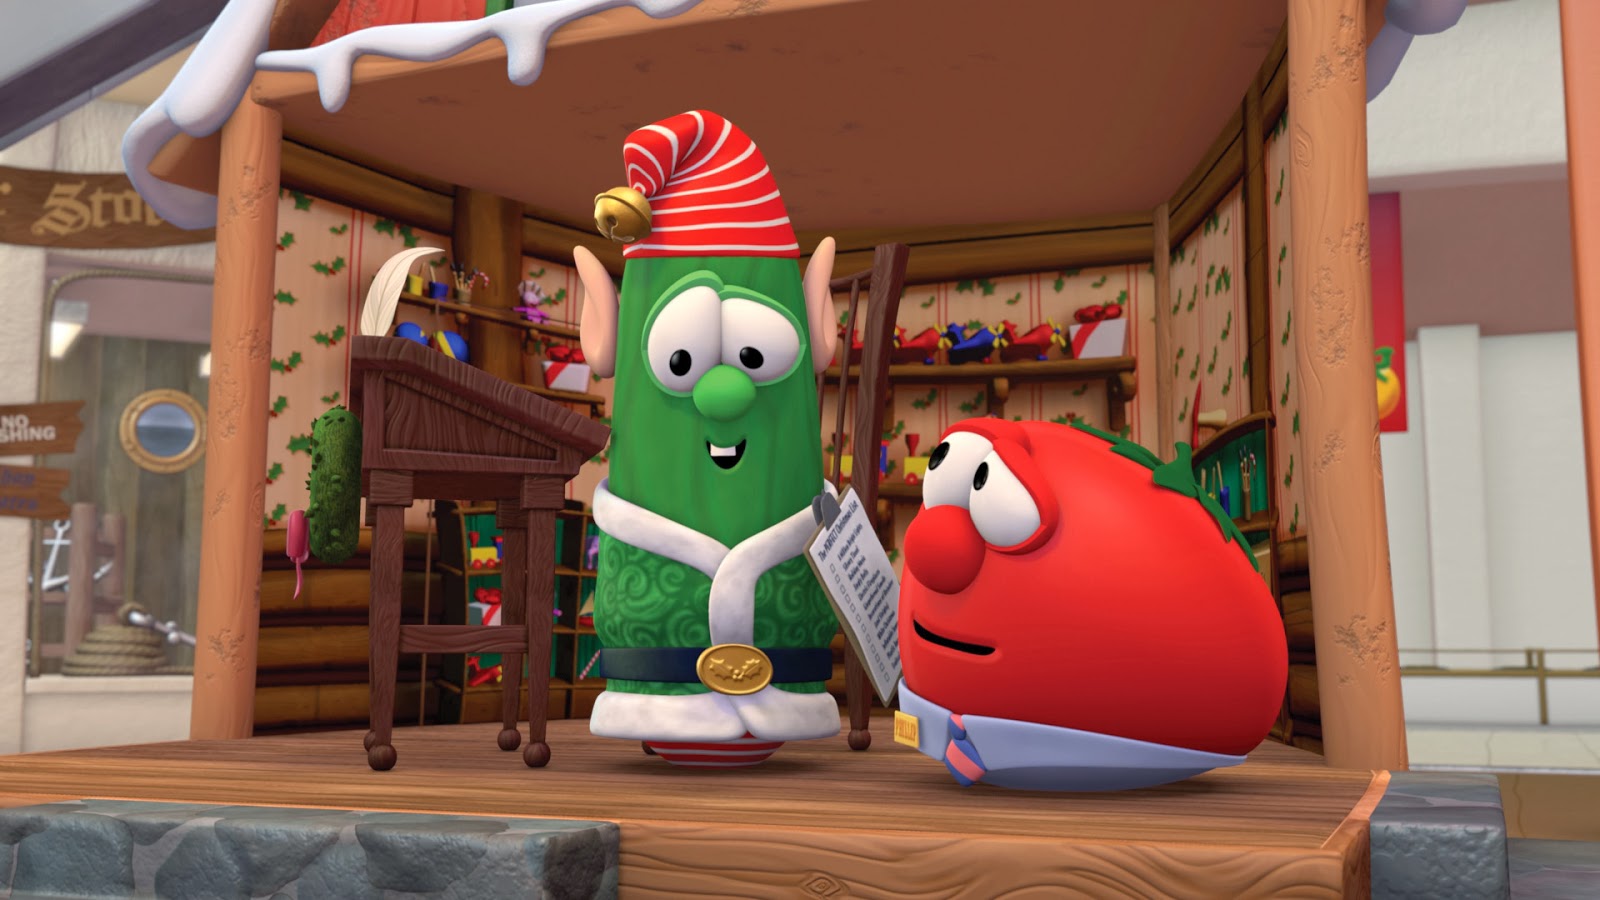 VeggieTales: Merry Larry and the True Light of Christmas DVD Review and Giv...